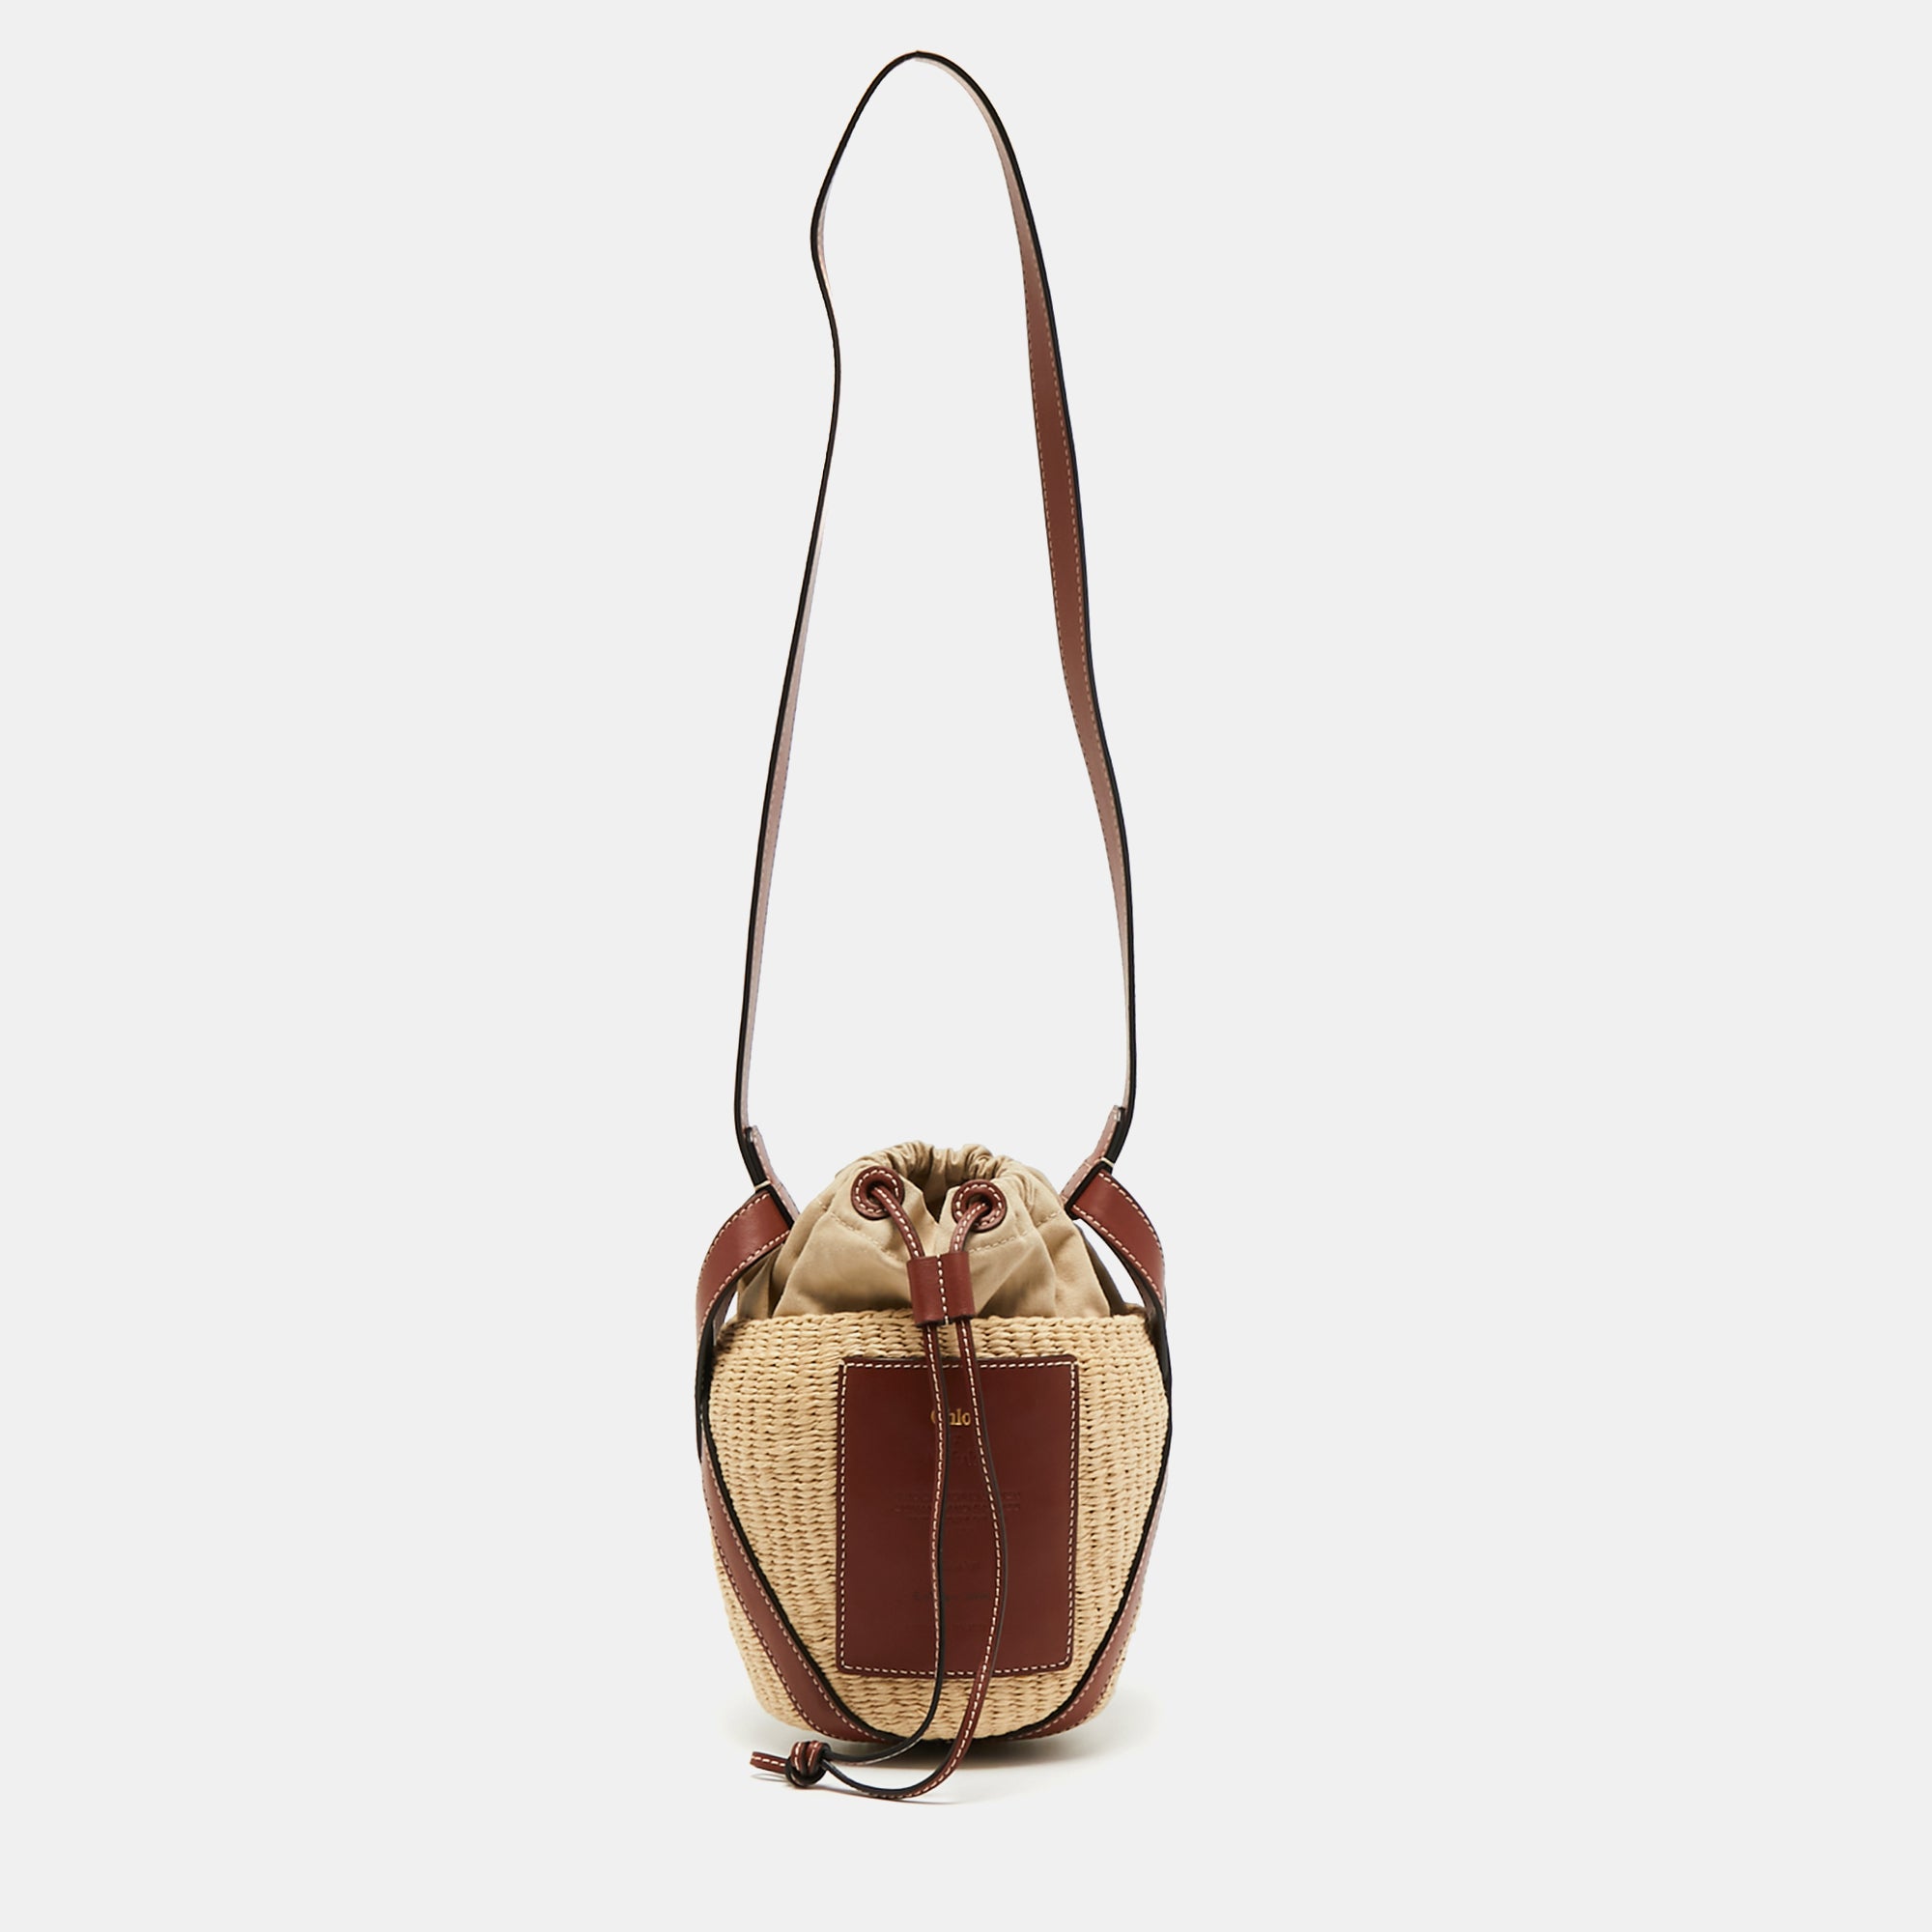 Designer Bags Outlet - Best Quality Replica Chloe Paraty Shoulder Bags  Snake Veins Leat http://www.bagcp.com/best-quality-replica-chloe -paraty-shoulder-bags-calf-leather-pur-p-3521.html | Facebook